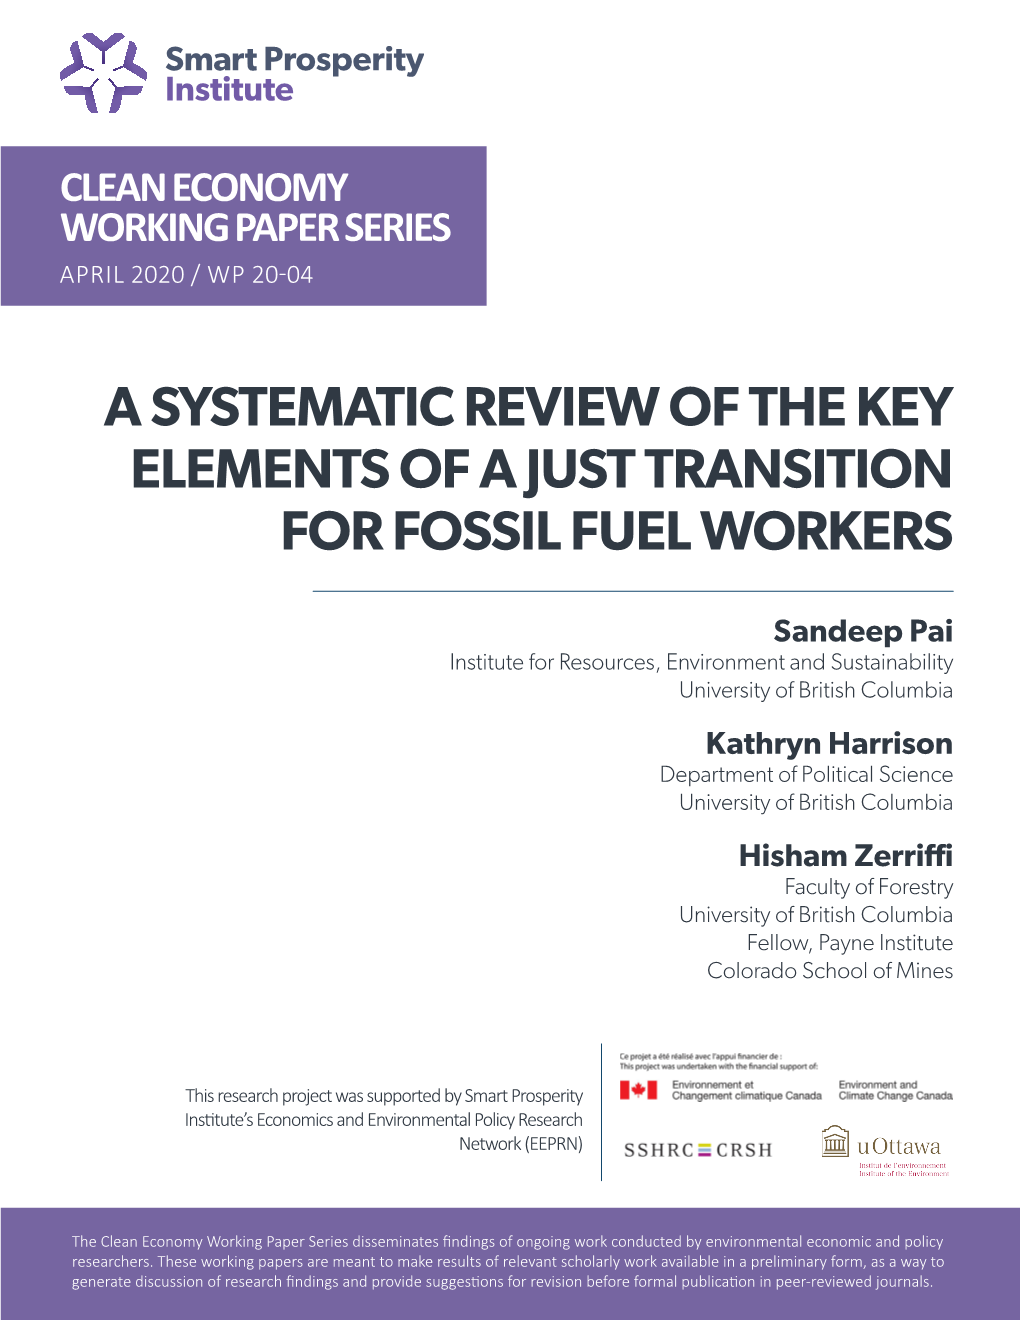 A Systematic Review of the Key Elements of a Just Transition for Fossil Fuel Workers